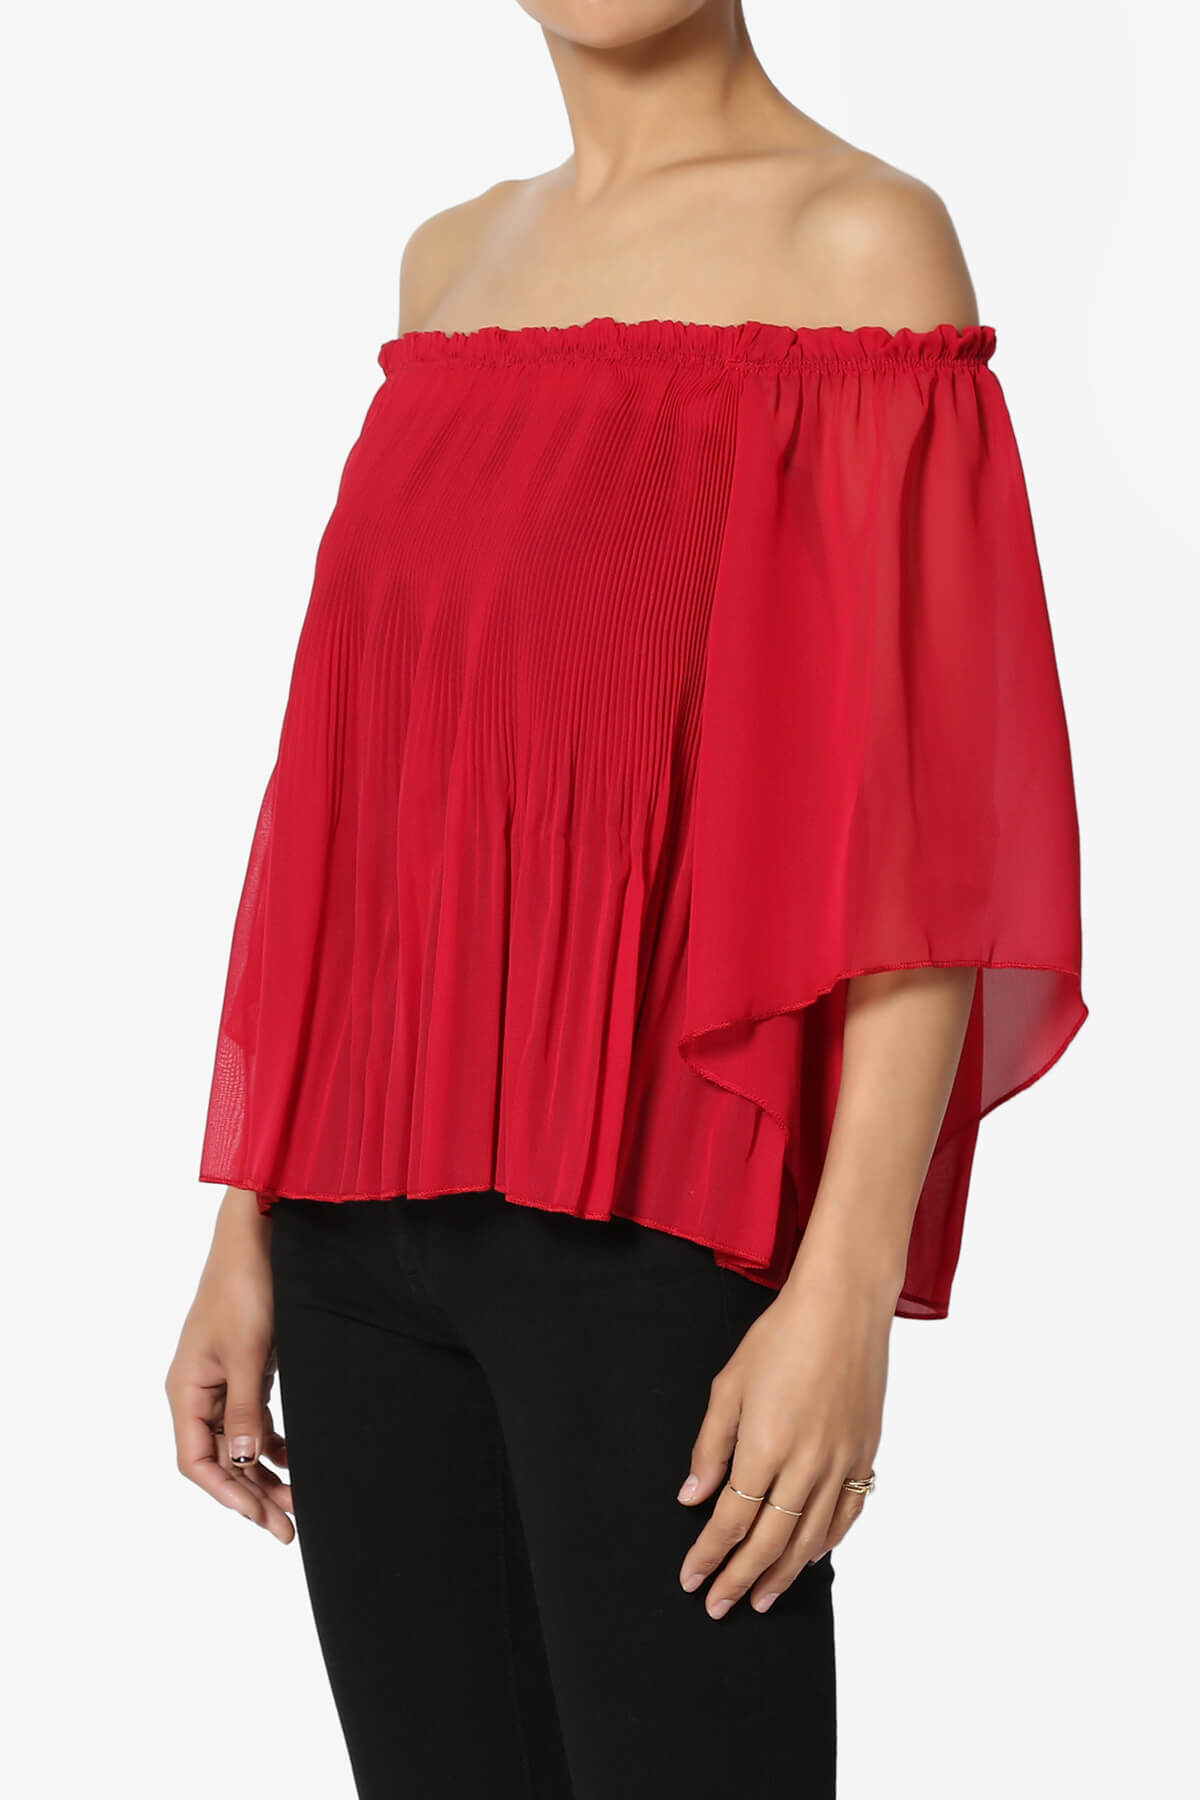 TheMogan Off The Shoulder Pleated Chiffon Blouse Flutter Sleeve Sheer ...